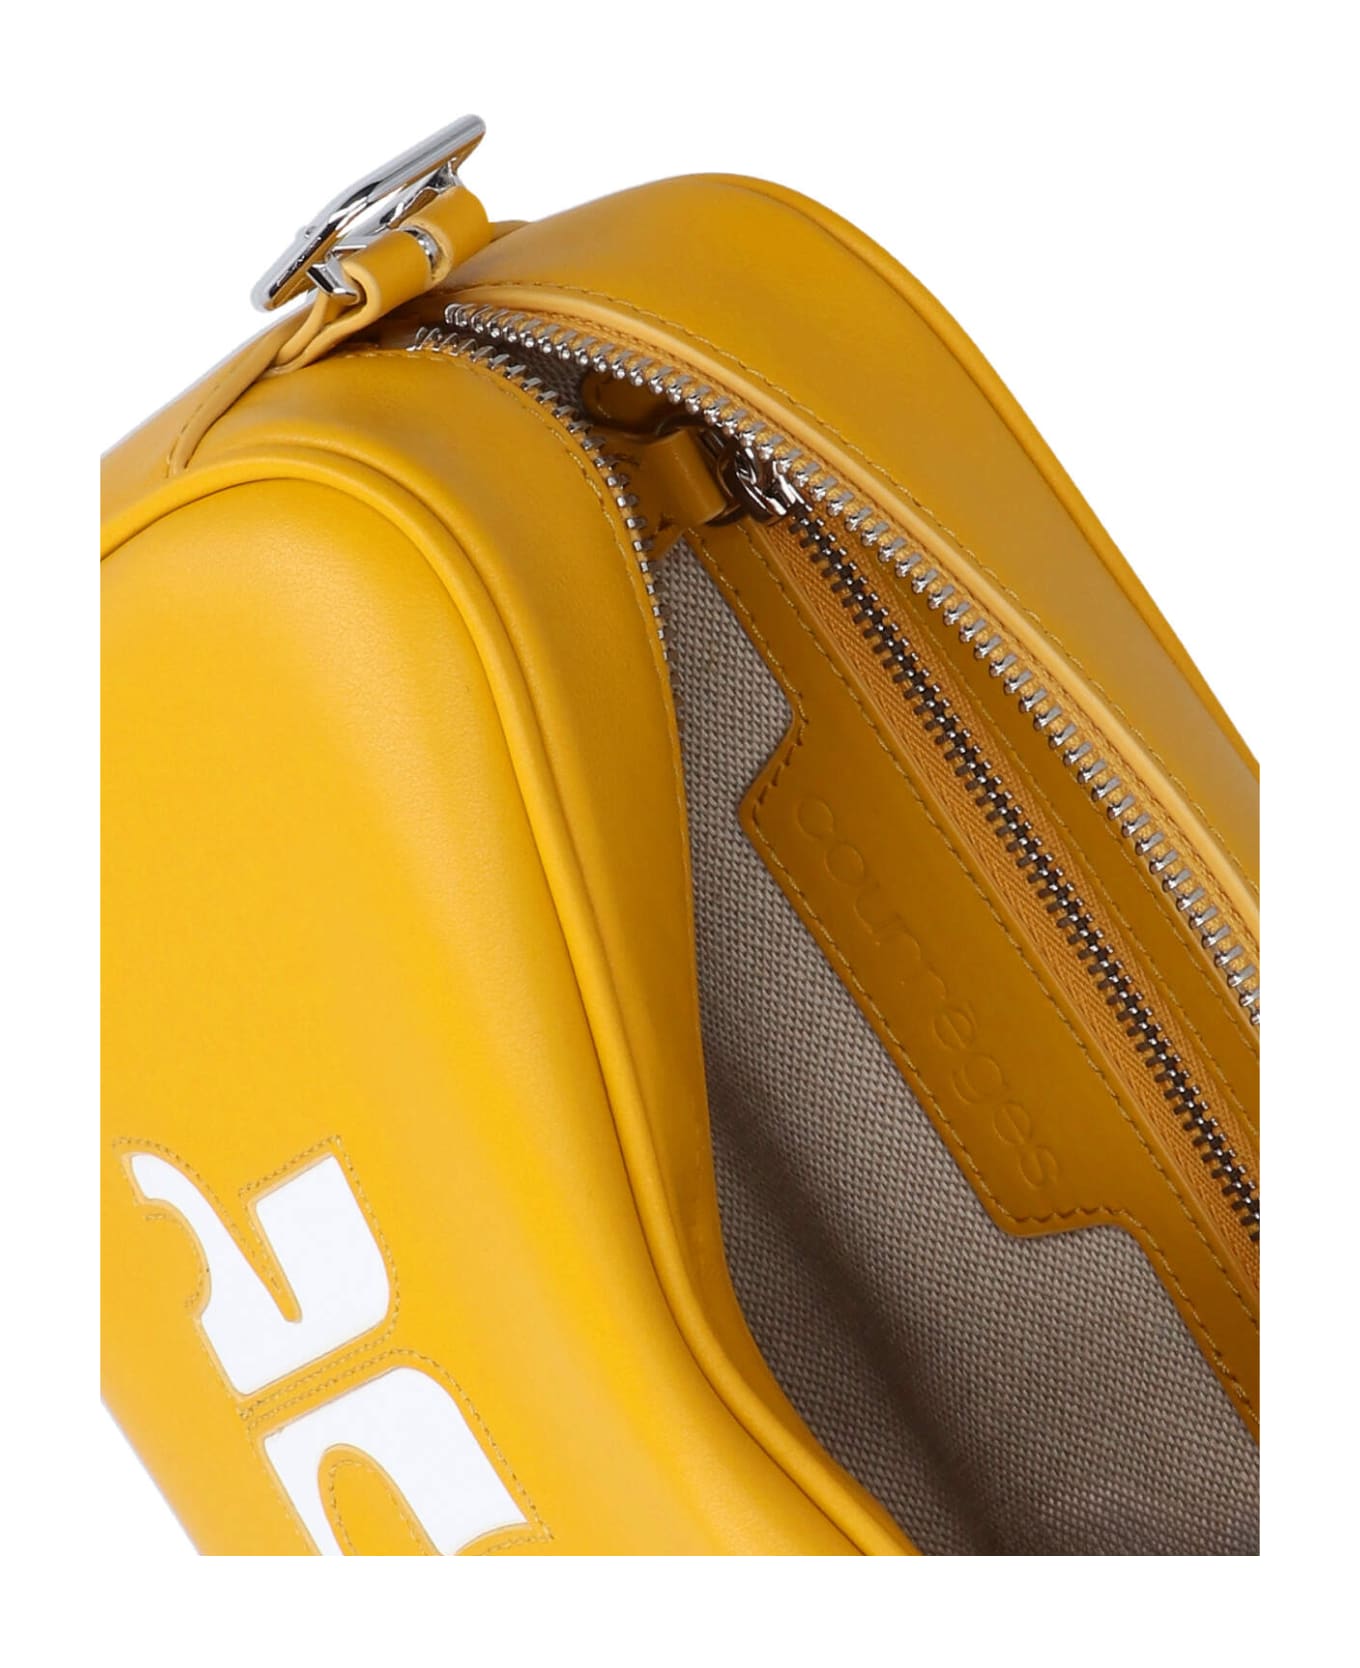 Courrèges "re-edition" Camera Bag - Yellow